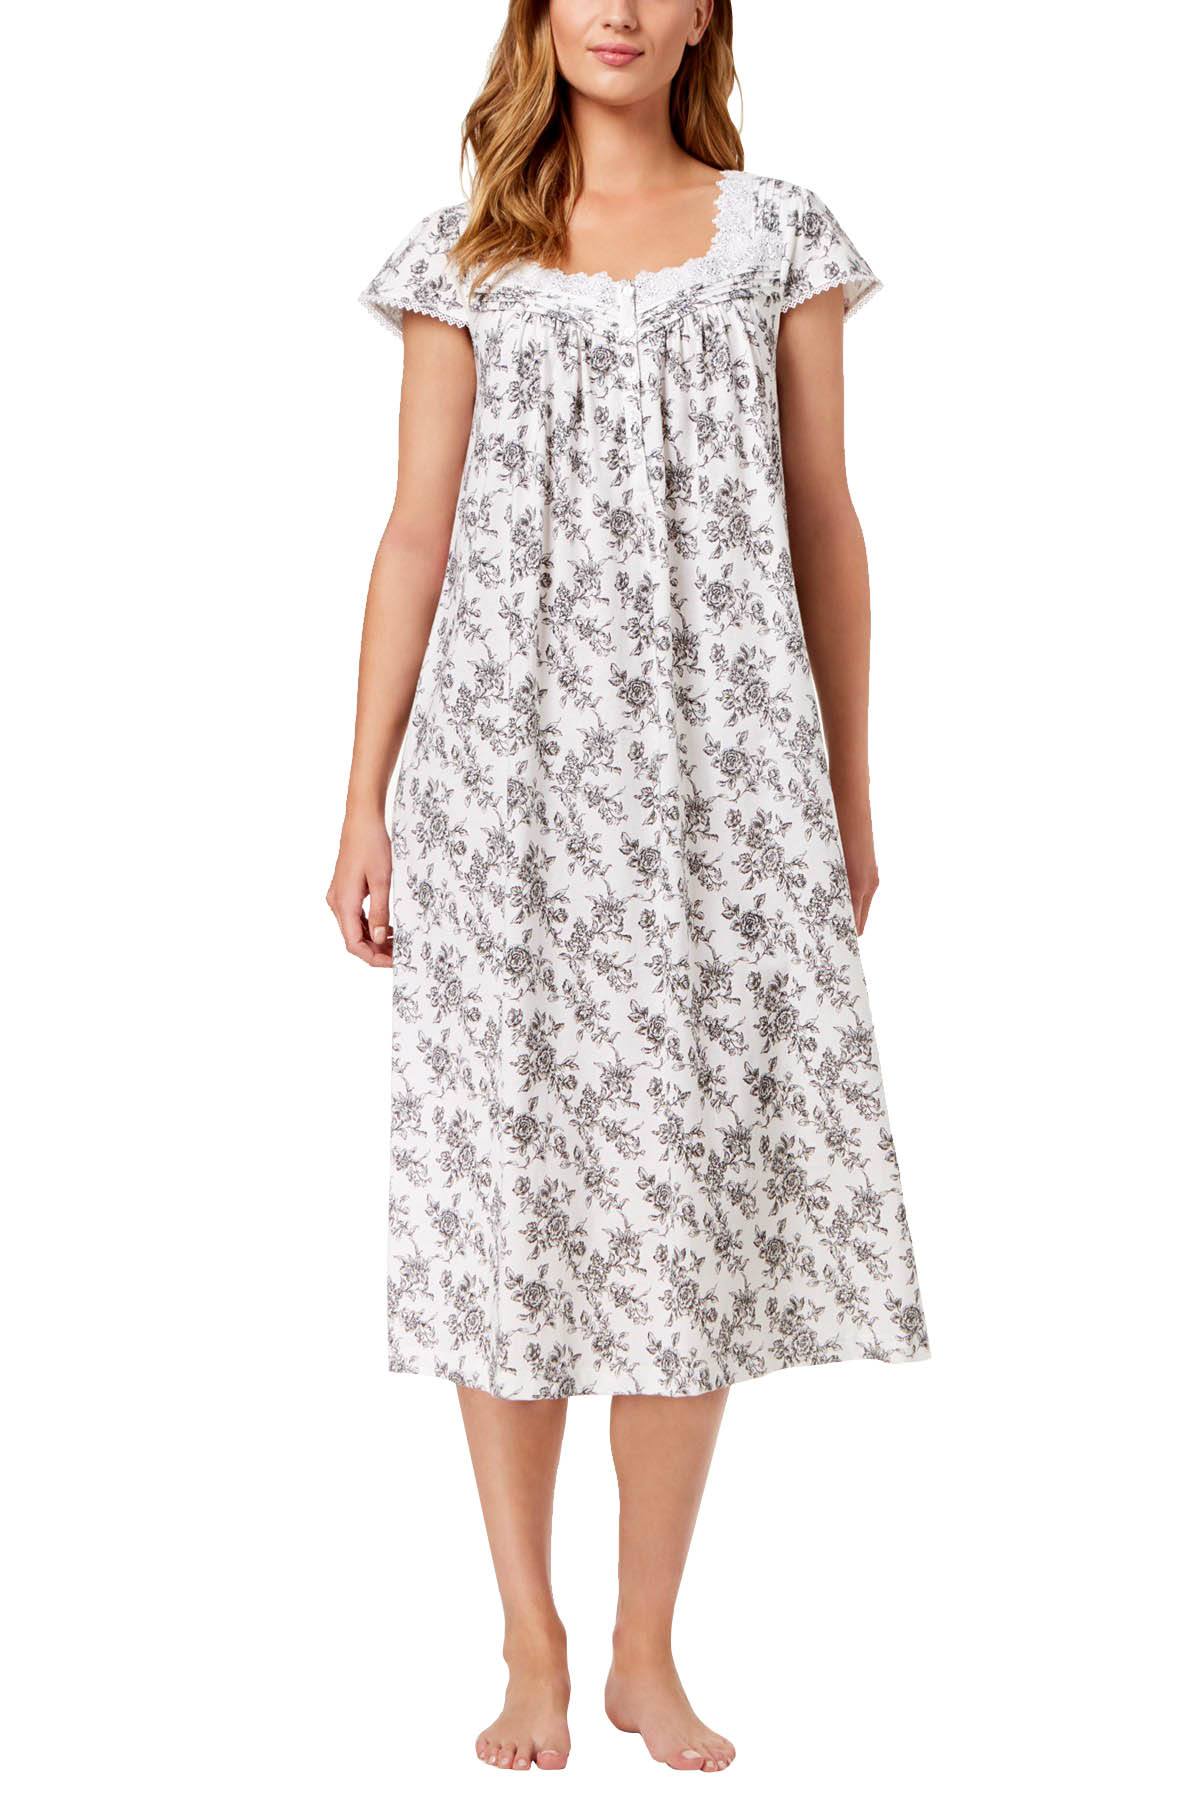 Charter Club Intimates Rose-Toile Printed Cotton Floral Border Nightgown